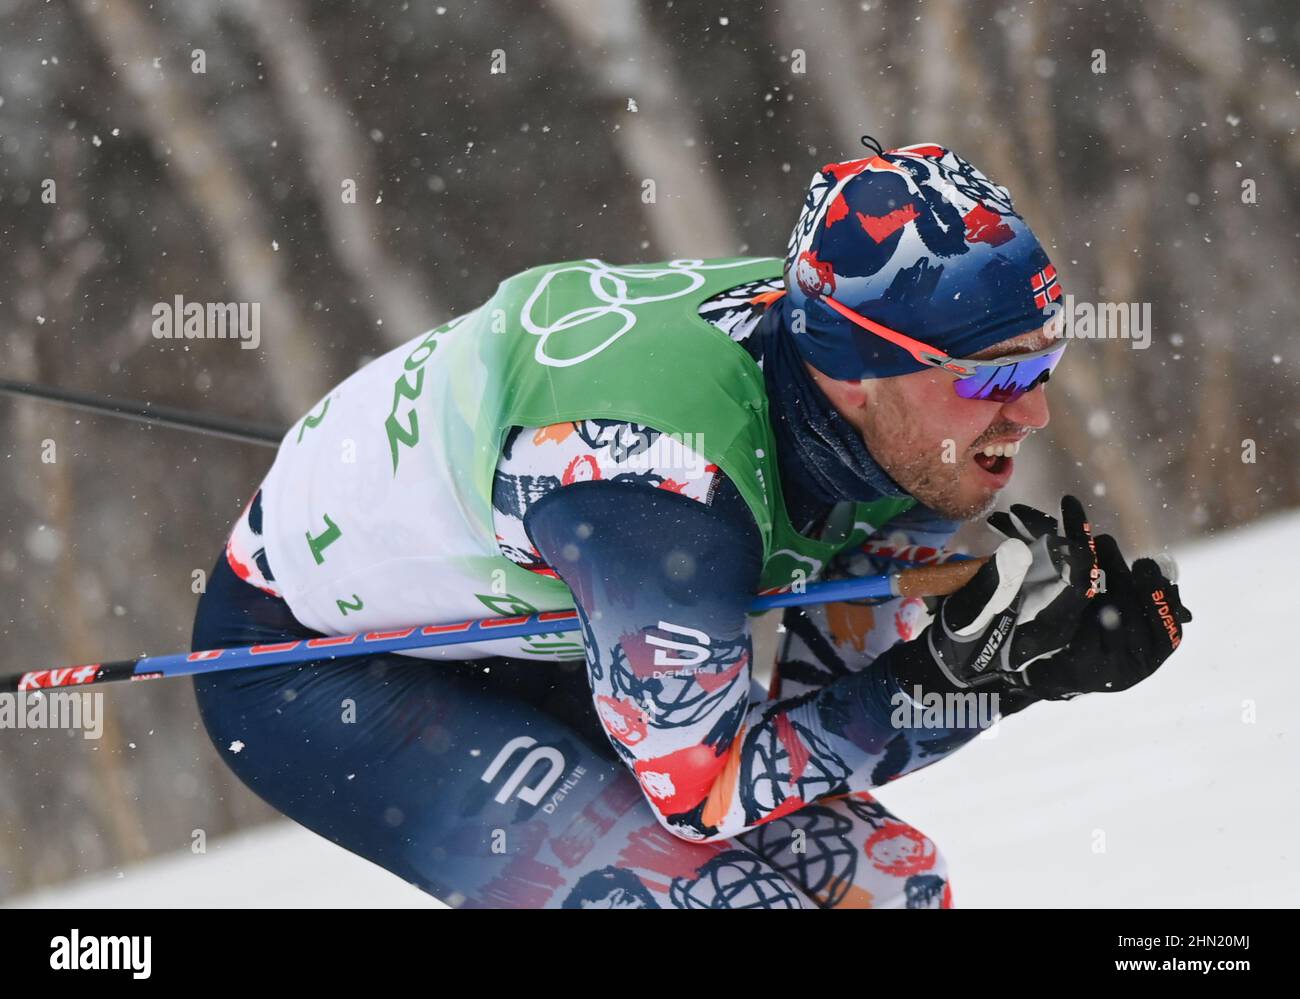 Zhangjiakou, China's Hebei Province. 13th Feb, 2022. Paal Golberg of Norway competes during the cross-country skiing men's 4x10 km relay of the Beijing Winter Olympics at National Cross-Country Skiing Centre in Zhangjiakou, north China's Hebei Province, Feb. 13, 2022. Credit: Deng Hua/Xinhua/Alamy Live News Stock Photo